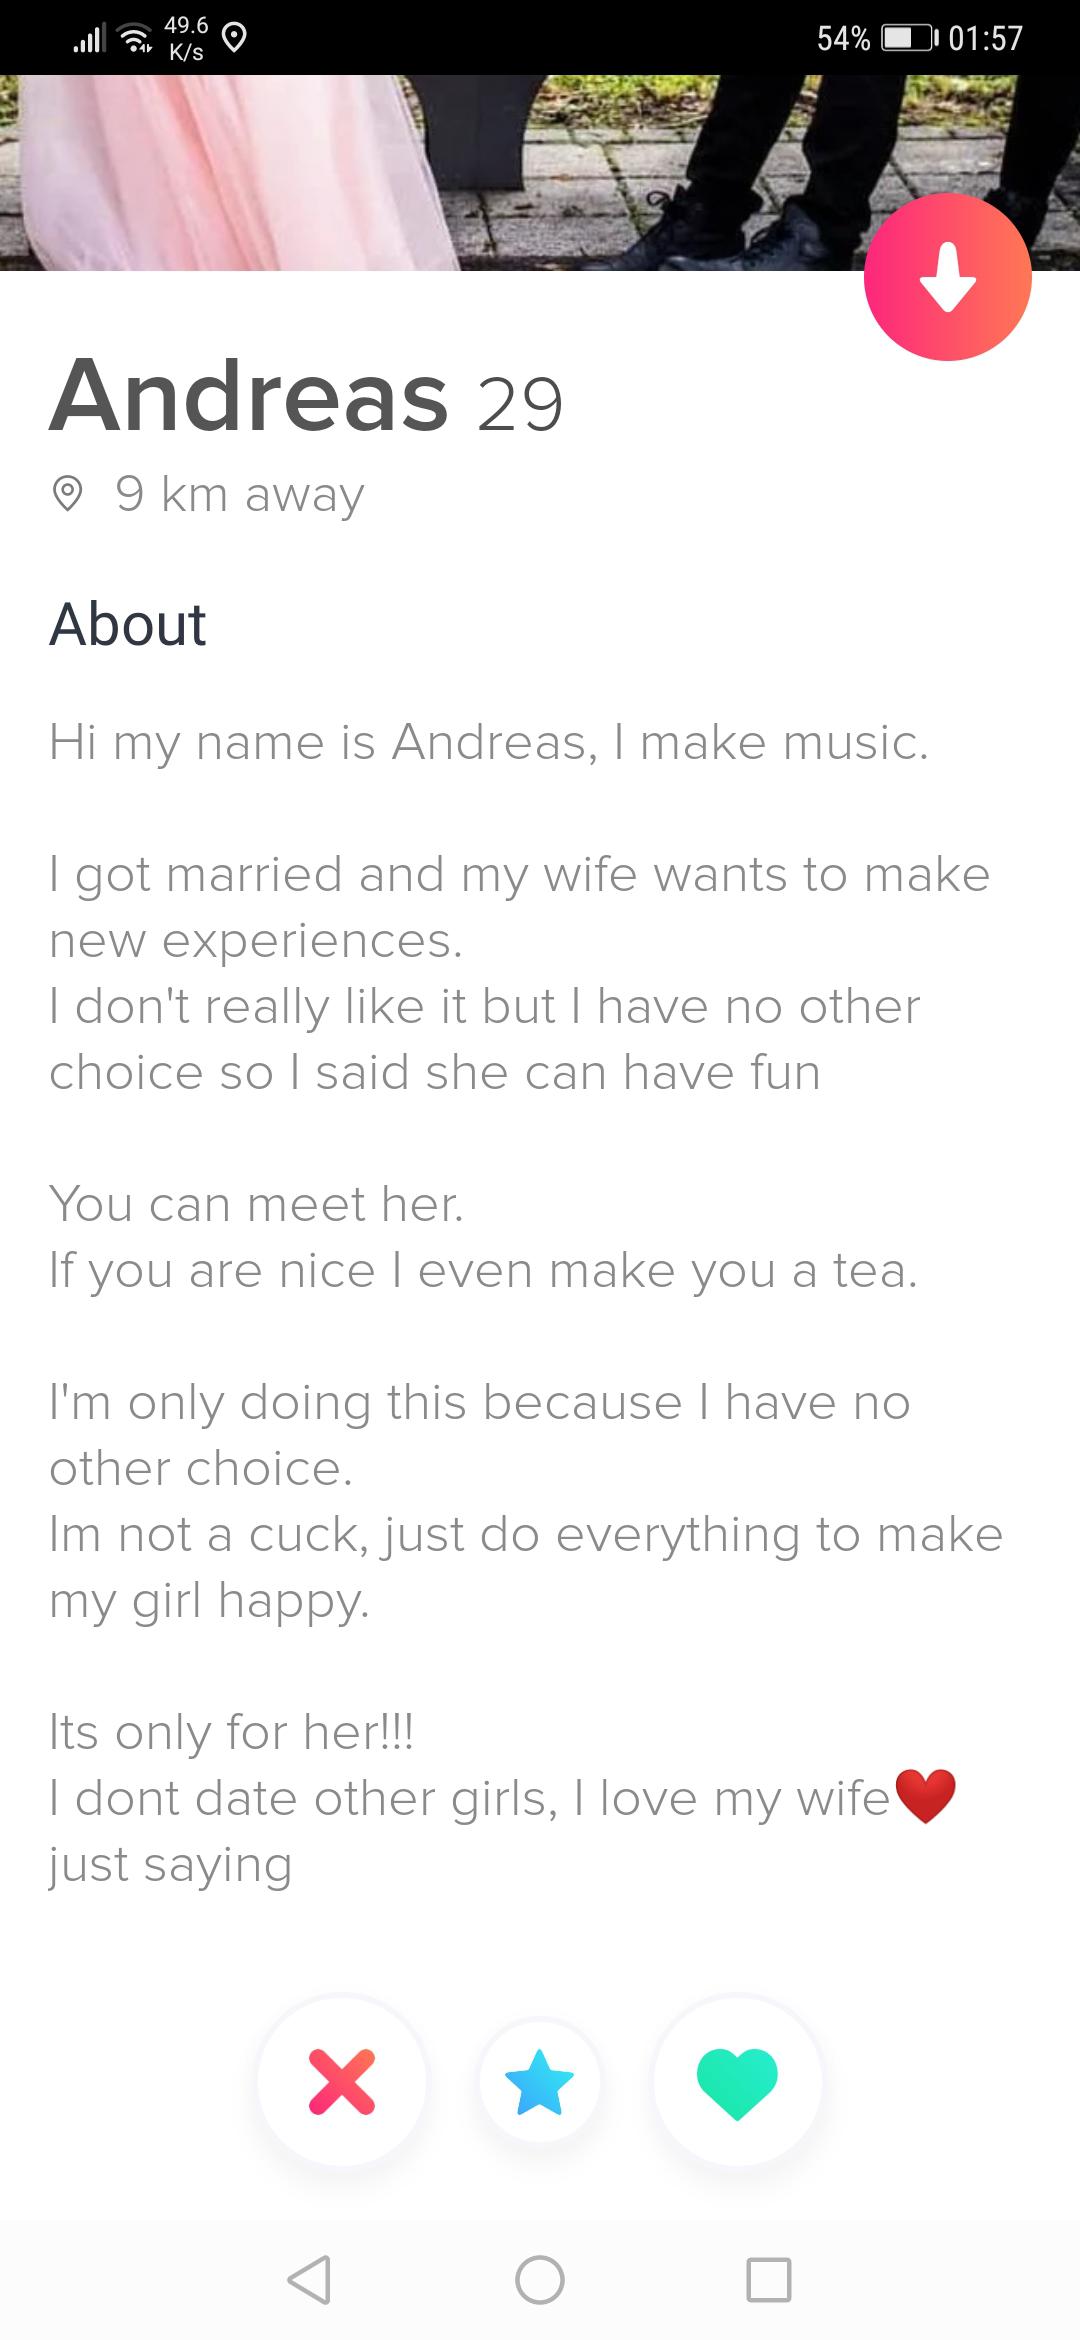 design - 49.6 KS 54% Andreas 29 9 km away About Hi my name is Andreas, I make music. I got married and my wife wants to make new experiences. I don't really it but I have no other choice so I said she can have fun You can meet her. If you are nice leven m